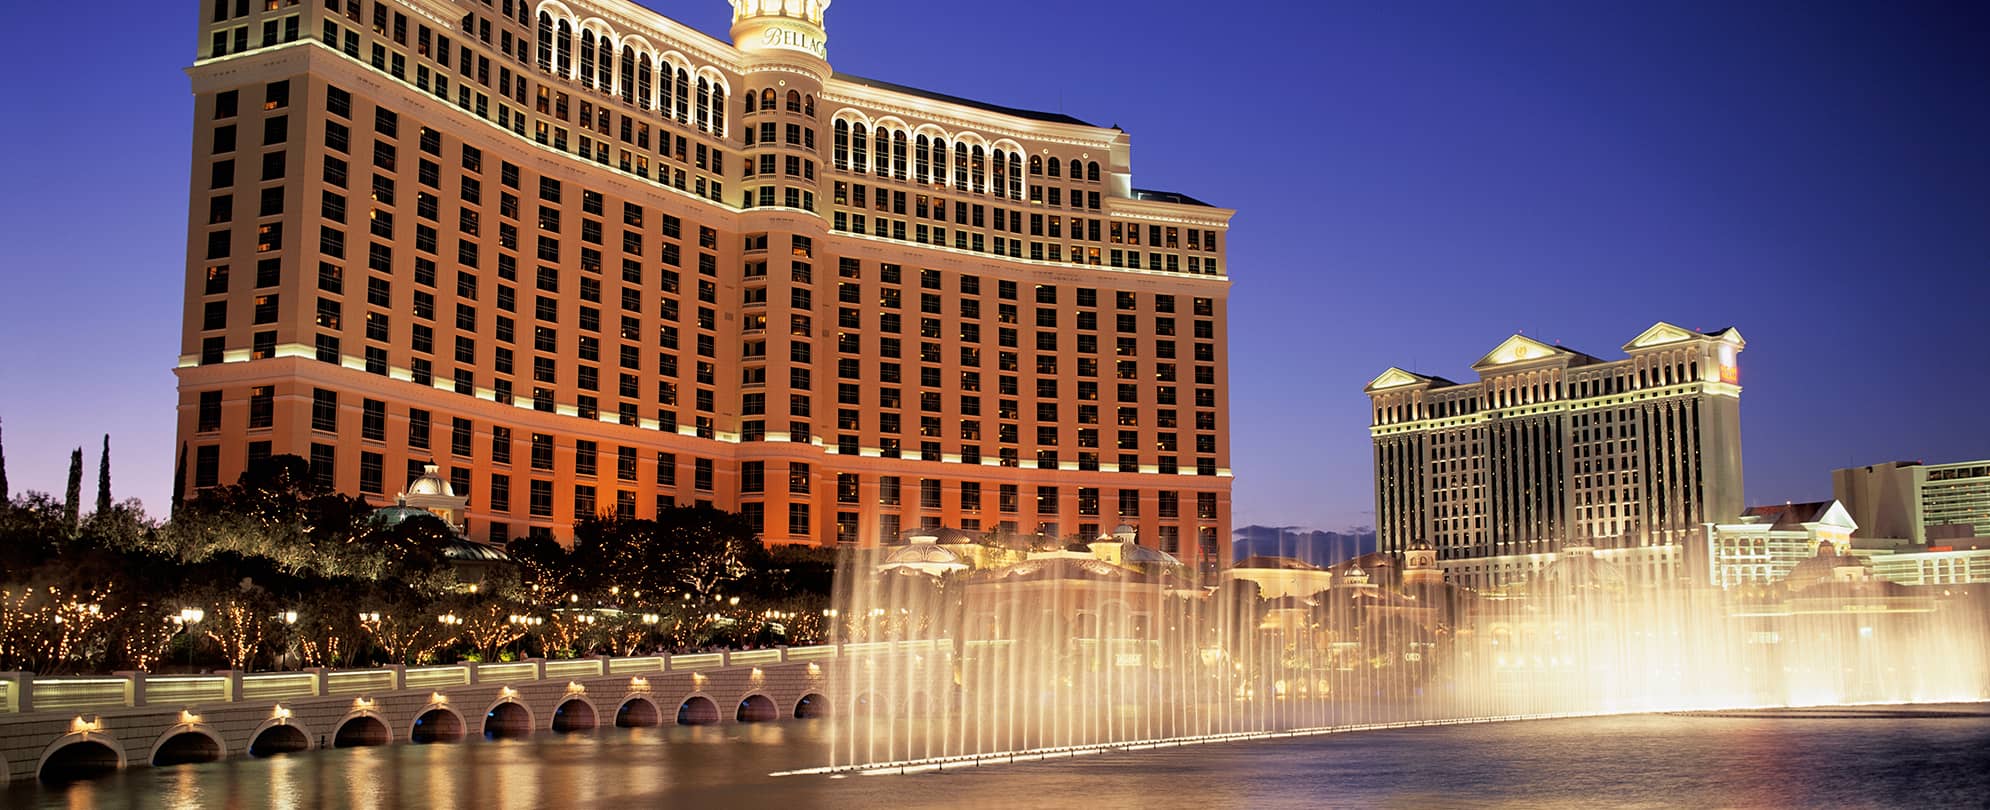 The Bellagio Hotel & Casino and fountains lit up at night in Las Vegas, Nevada.